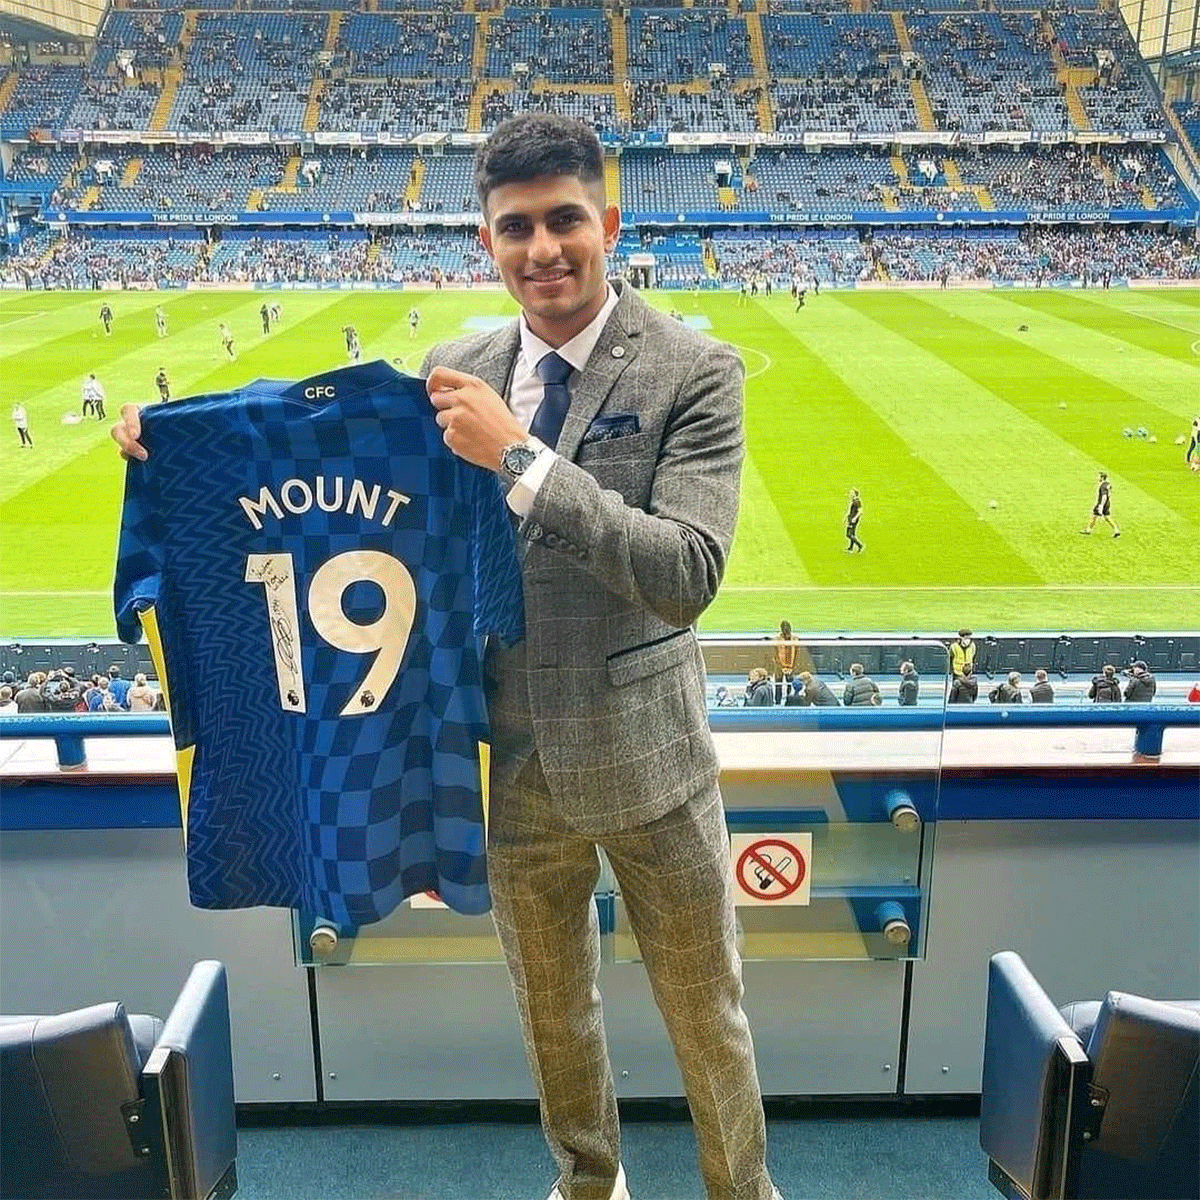 Shubman Gill with the jersey gifted by Chelsea striker Mason Mount at Stamford Bridge in London on Saturday